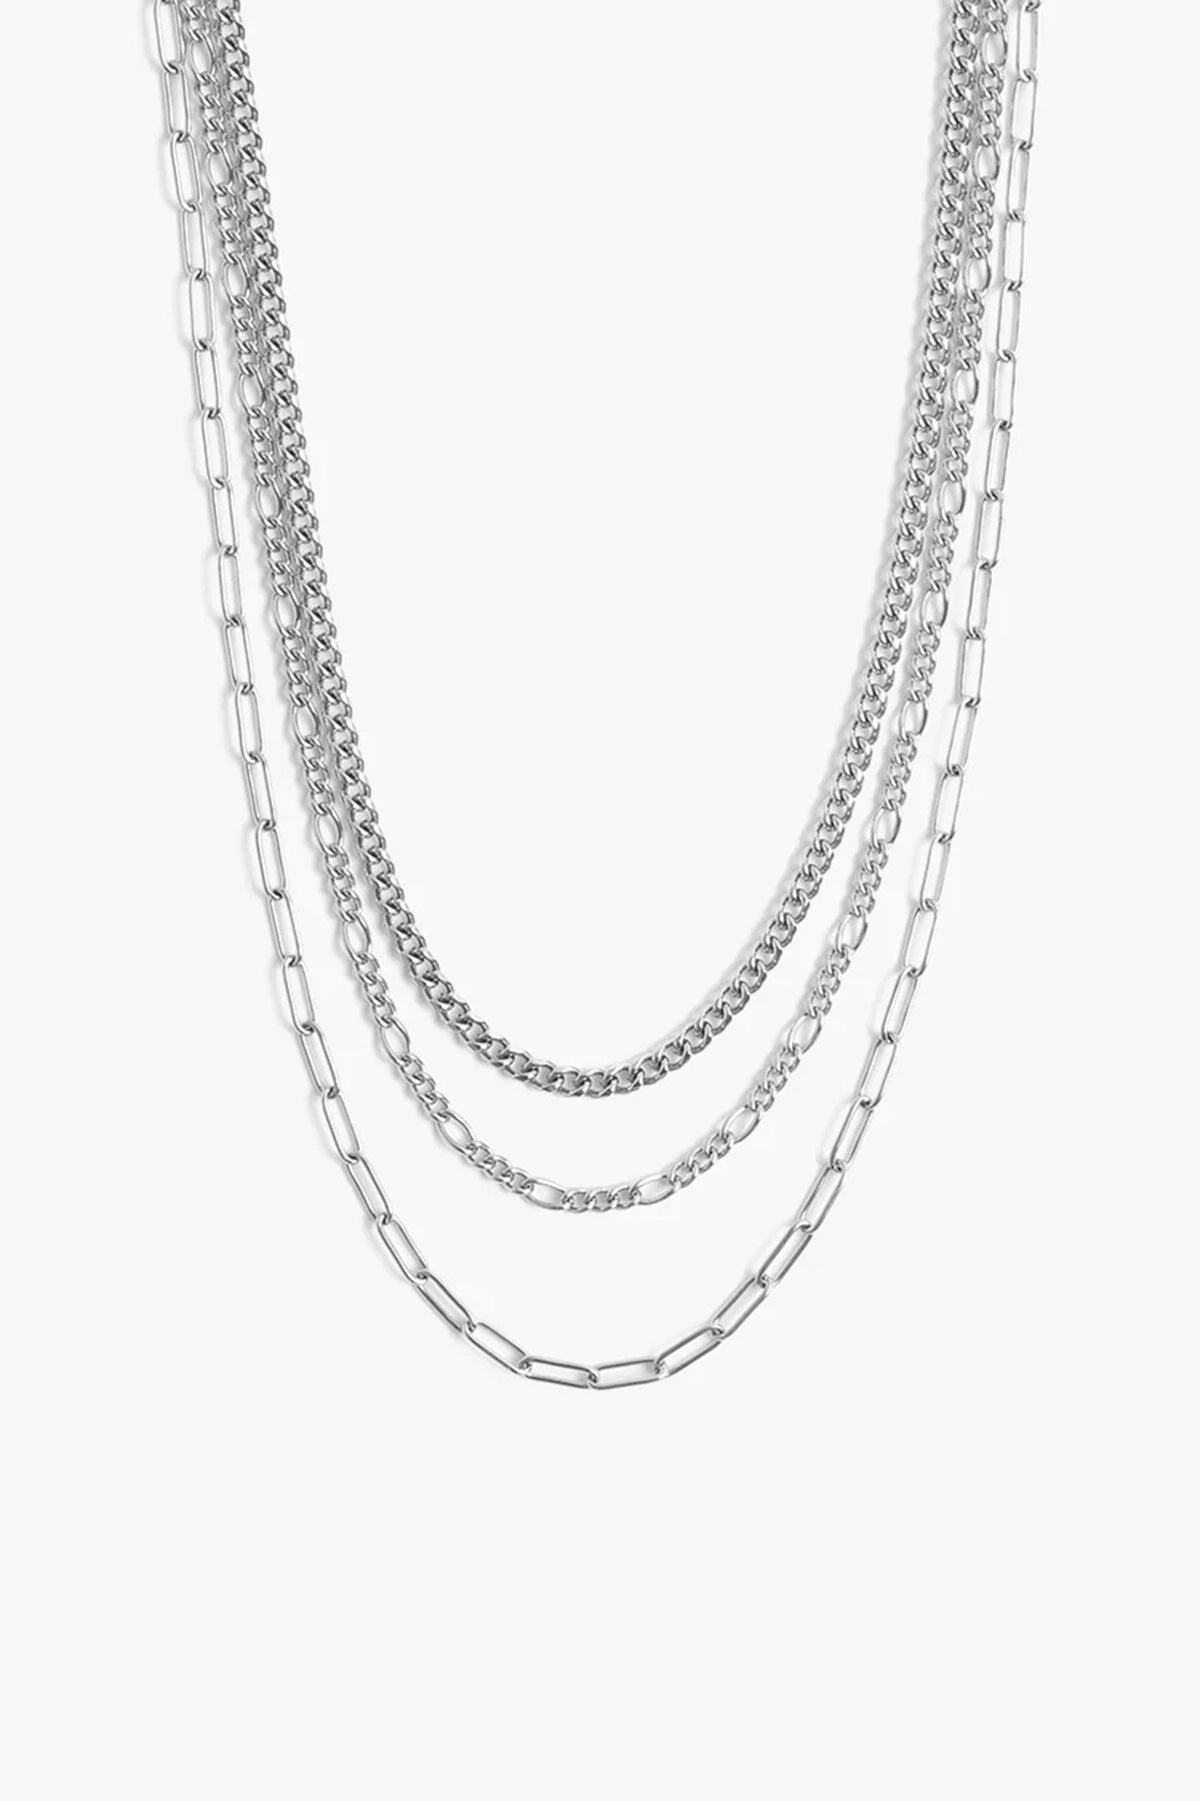 Marrin Costello - Trilogy Layered Necklace - Silver